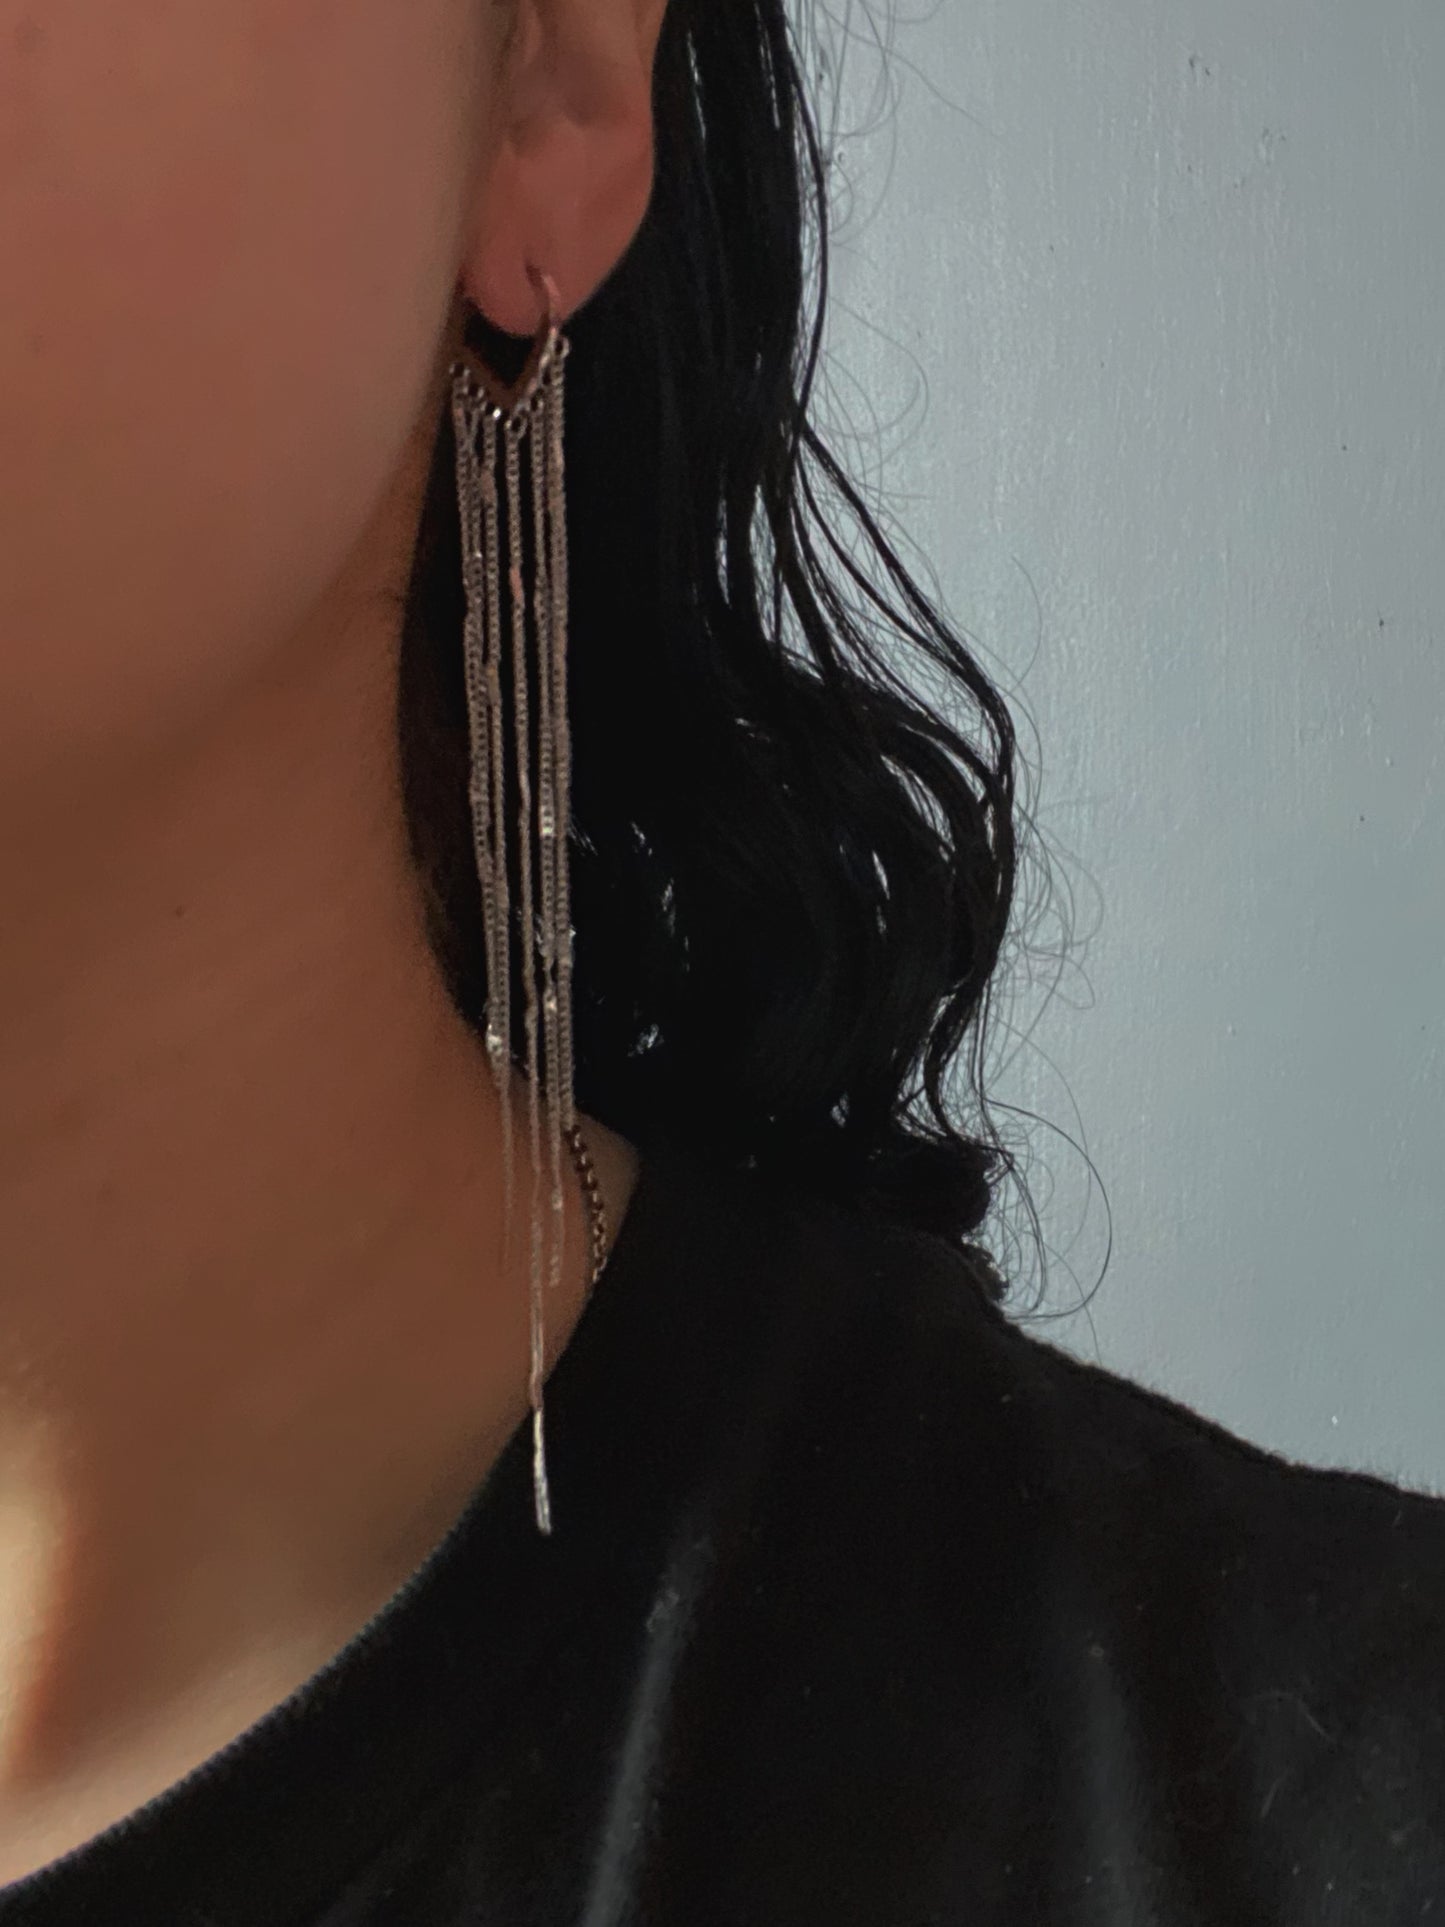 “No Strings Attached” earrings